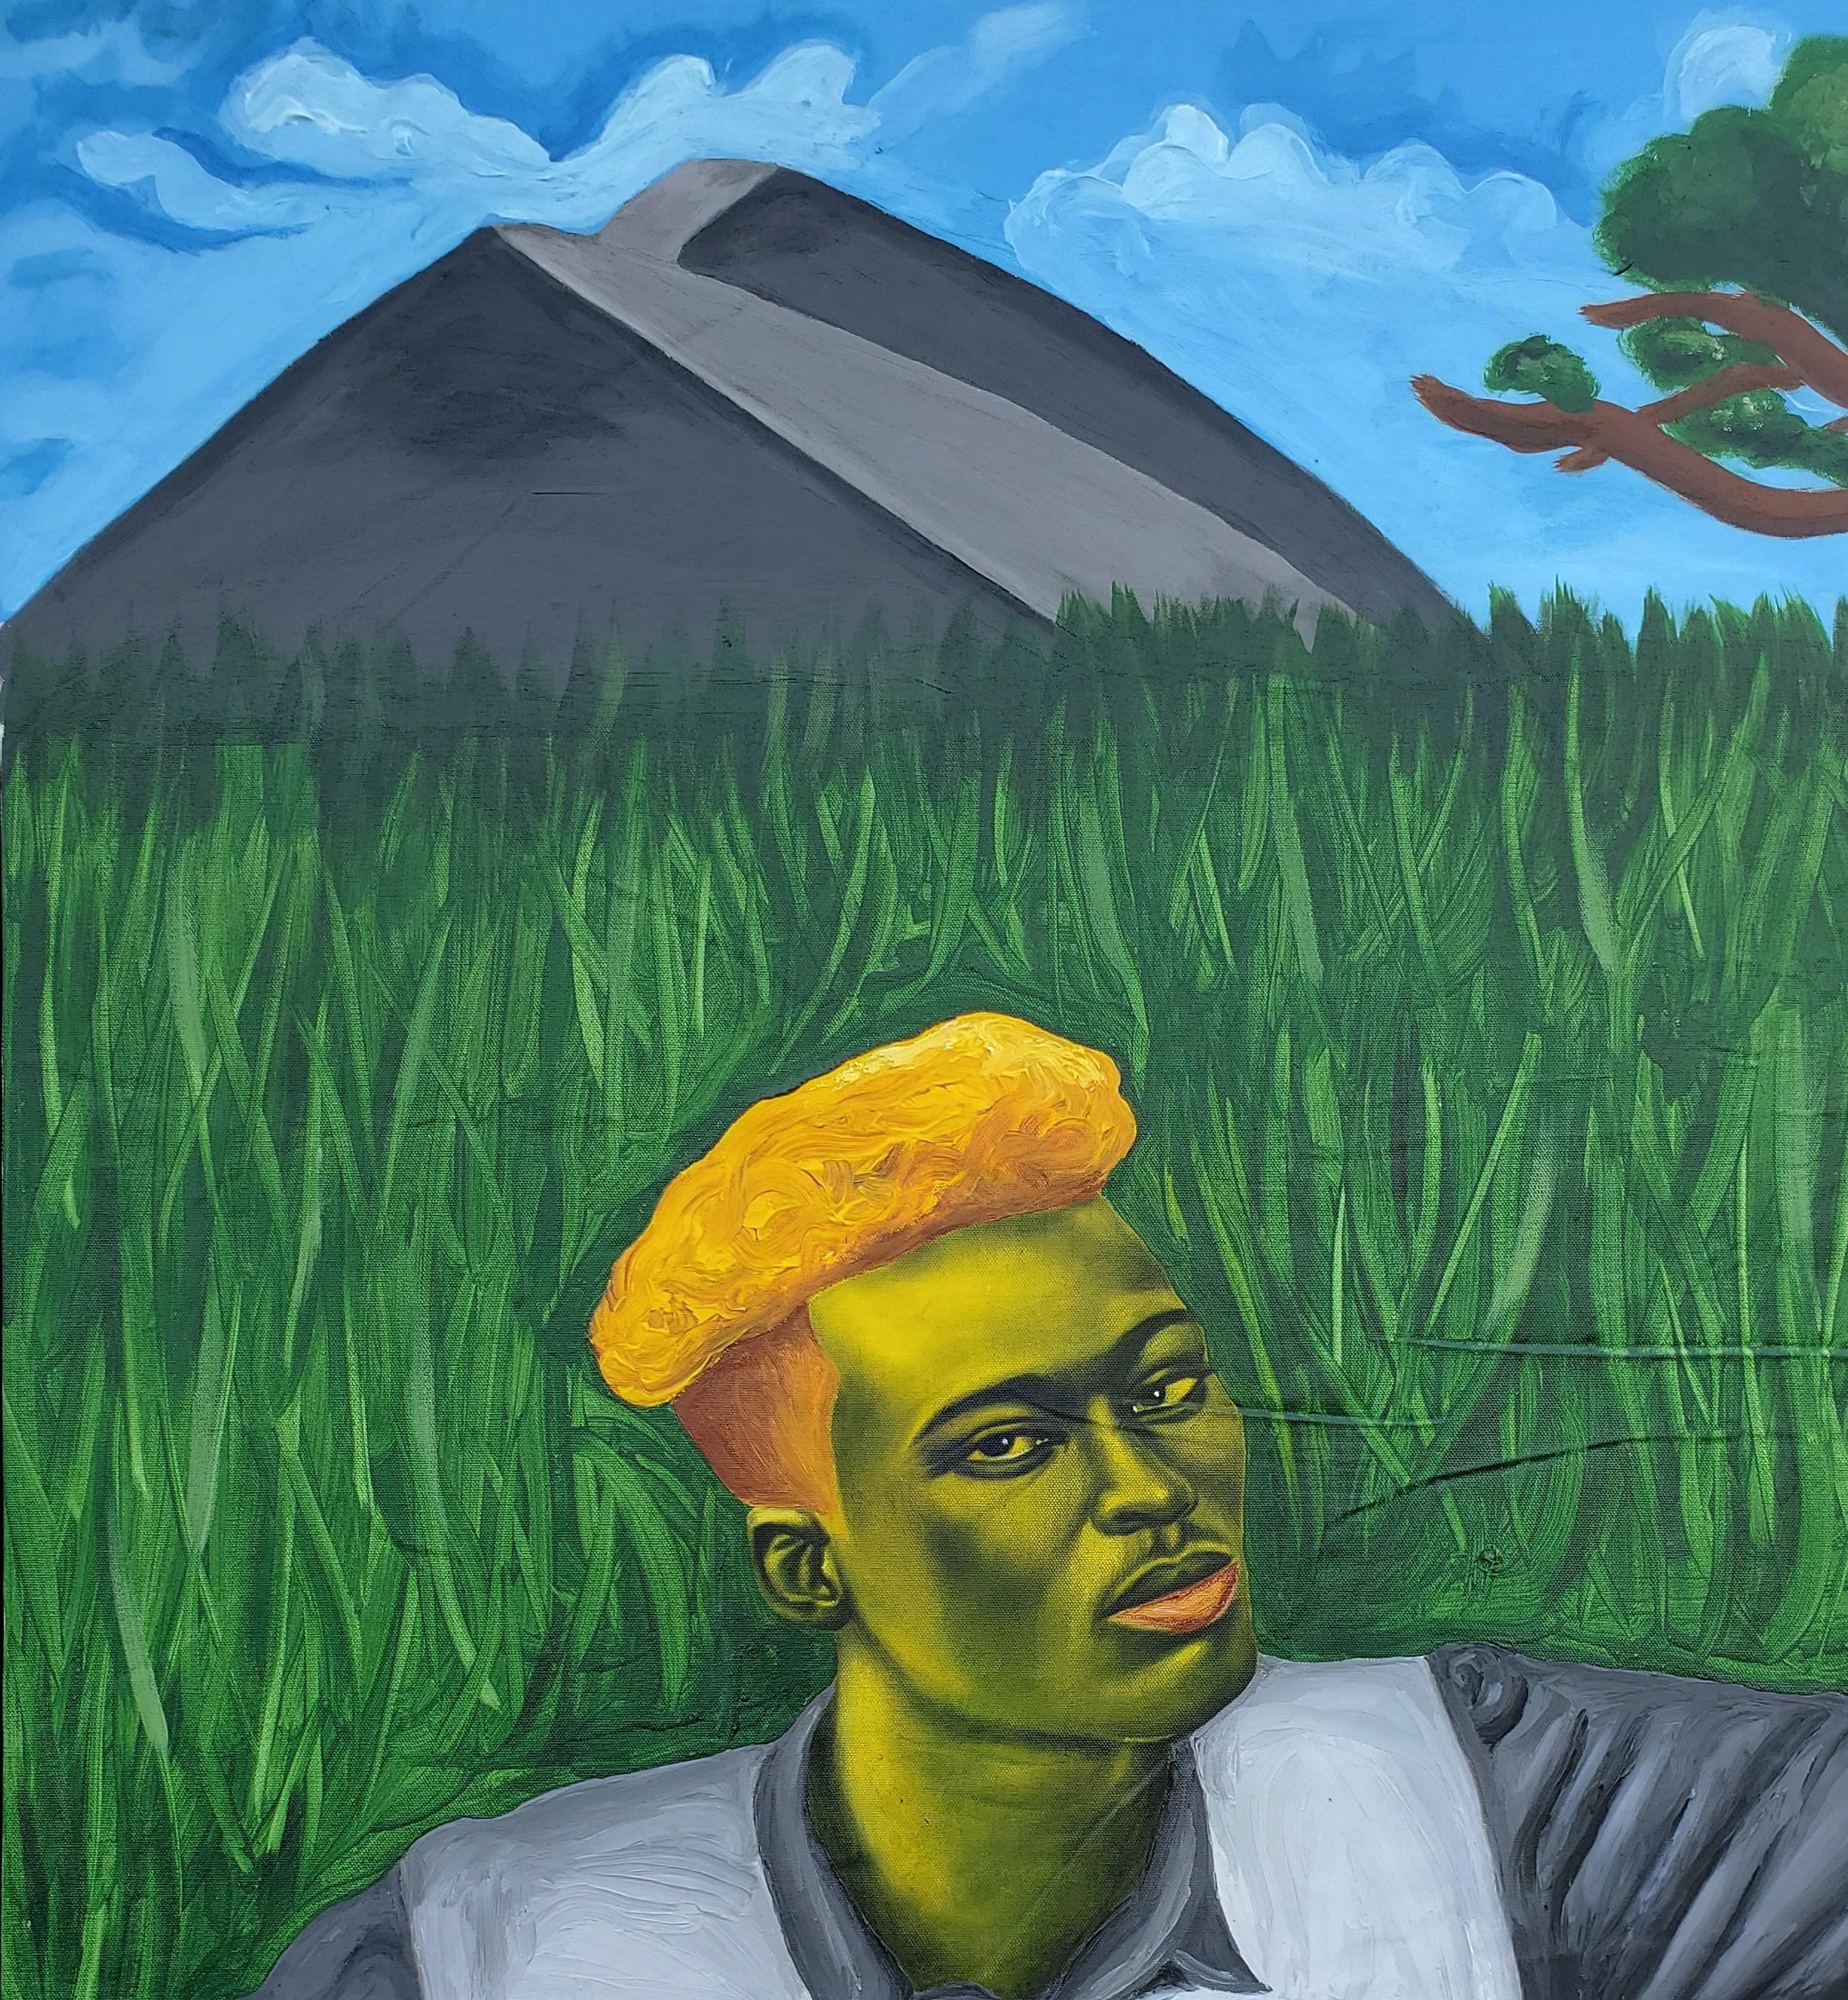 Untitled - Painting by Simeon Nwoko